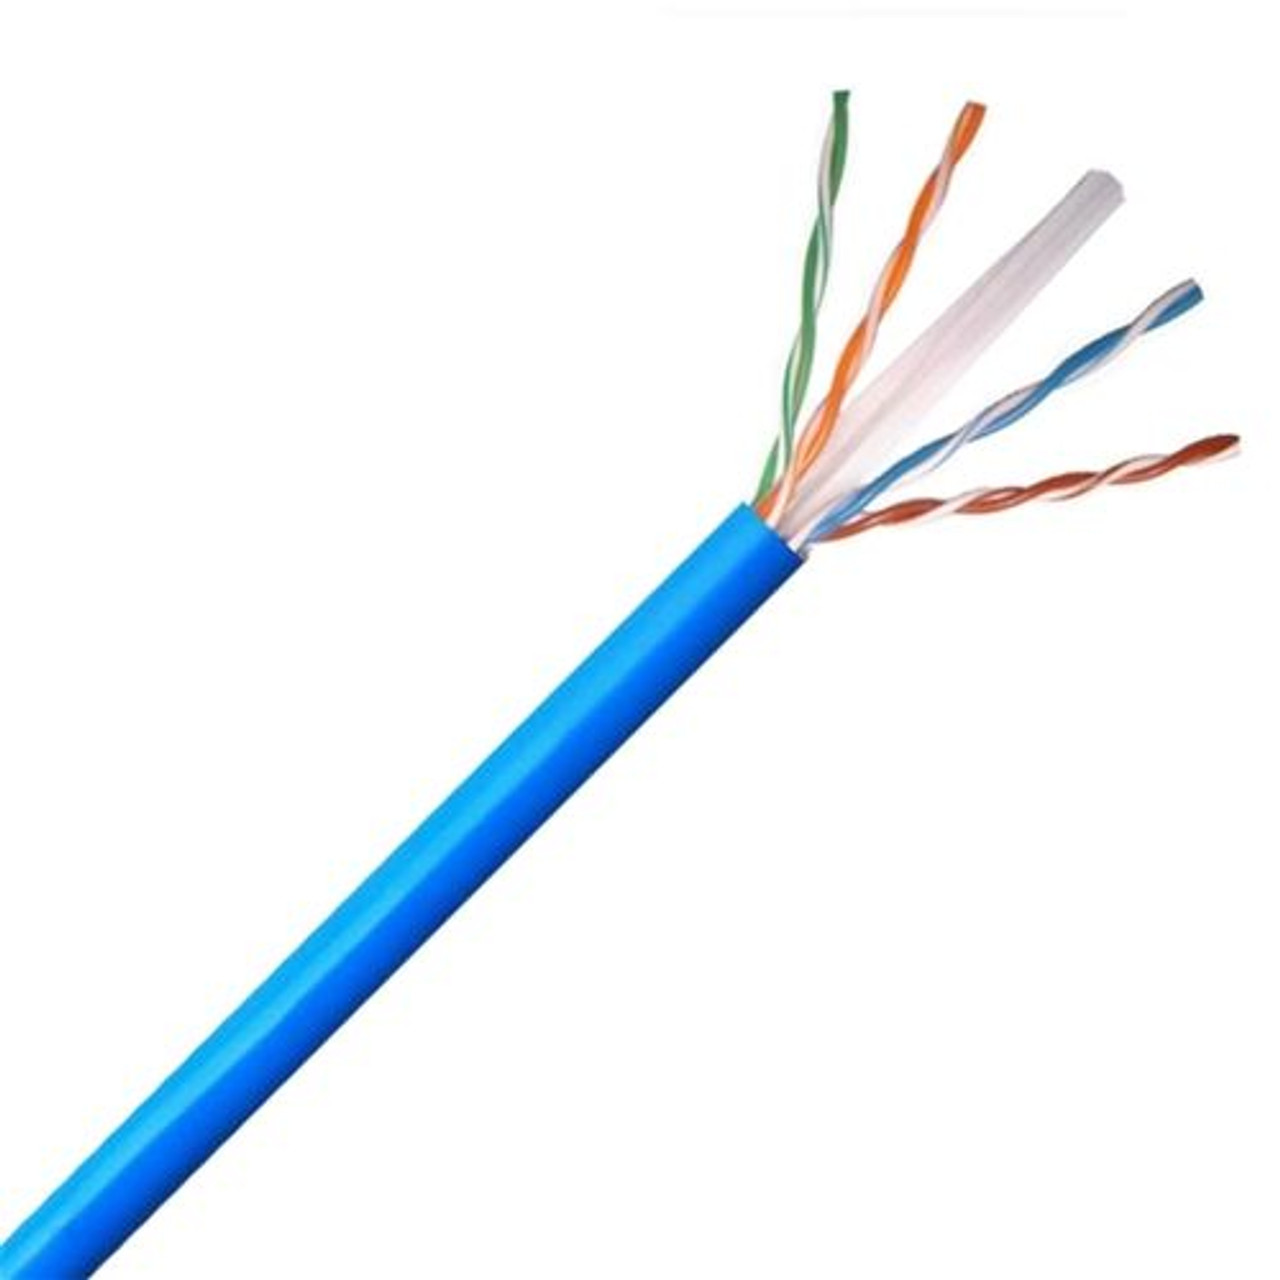 Eagle CAT6 Cable 150' FT Blue Bulk 550 MHz Solid Copper Unshielded 4 Twisted Pair UTP Network FastCat Cable UL Exceeds All Standards CMR 23 AWG 5092 ETL Verified Ethernet CAT6 Data Transfer Line